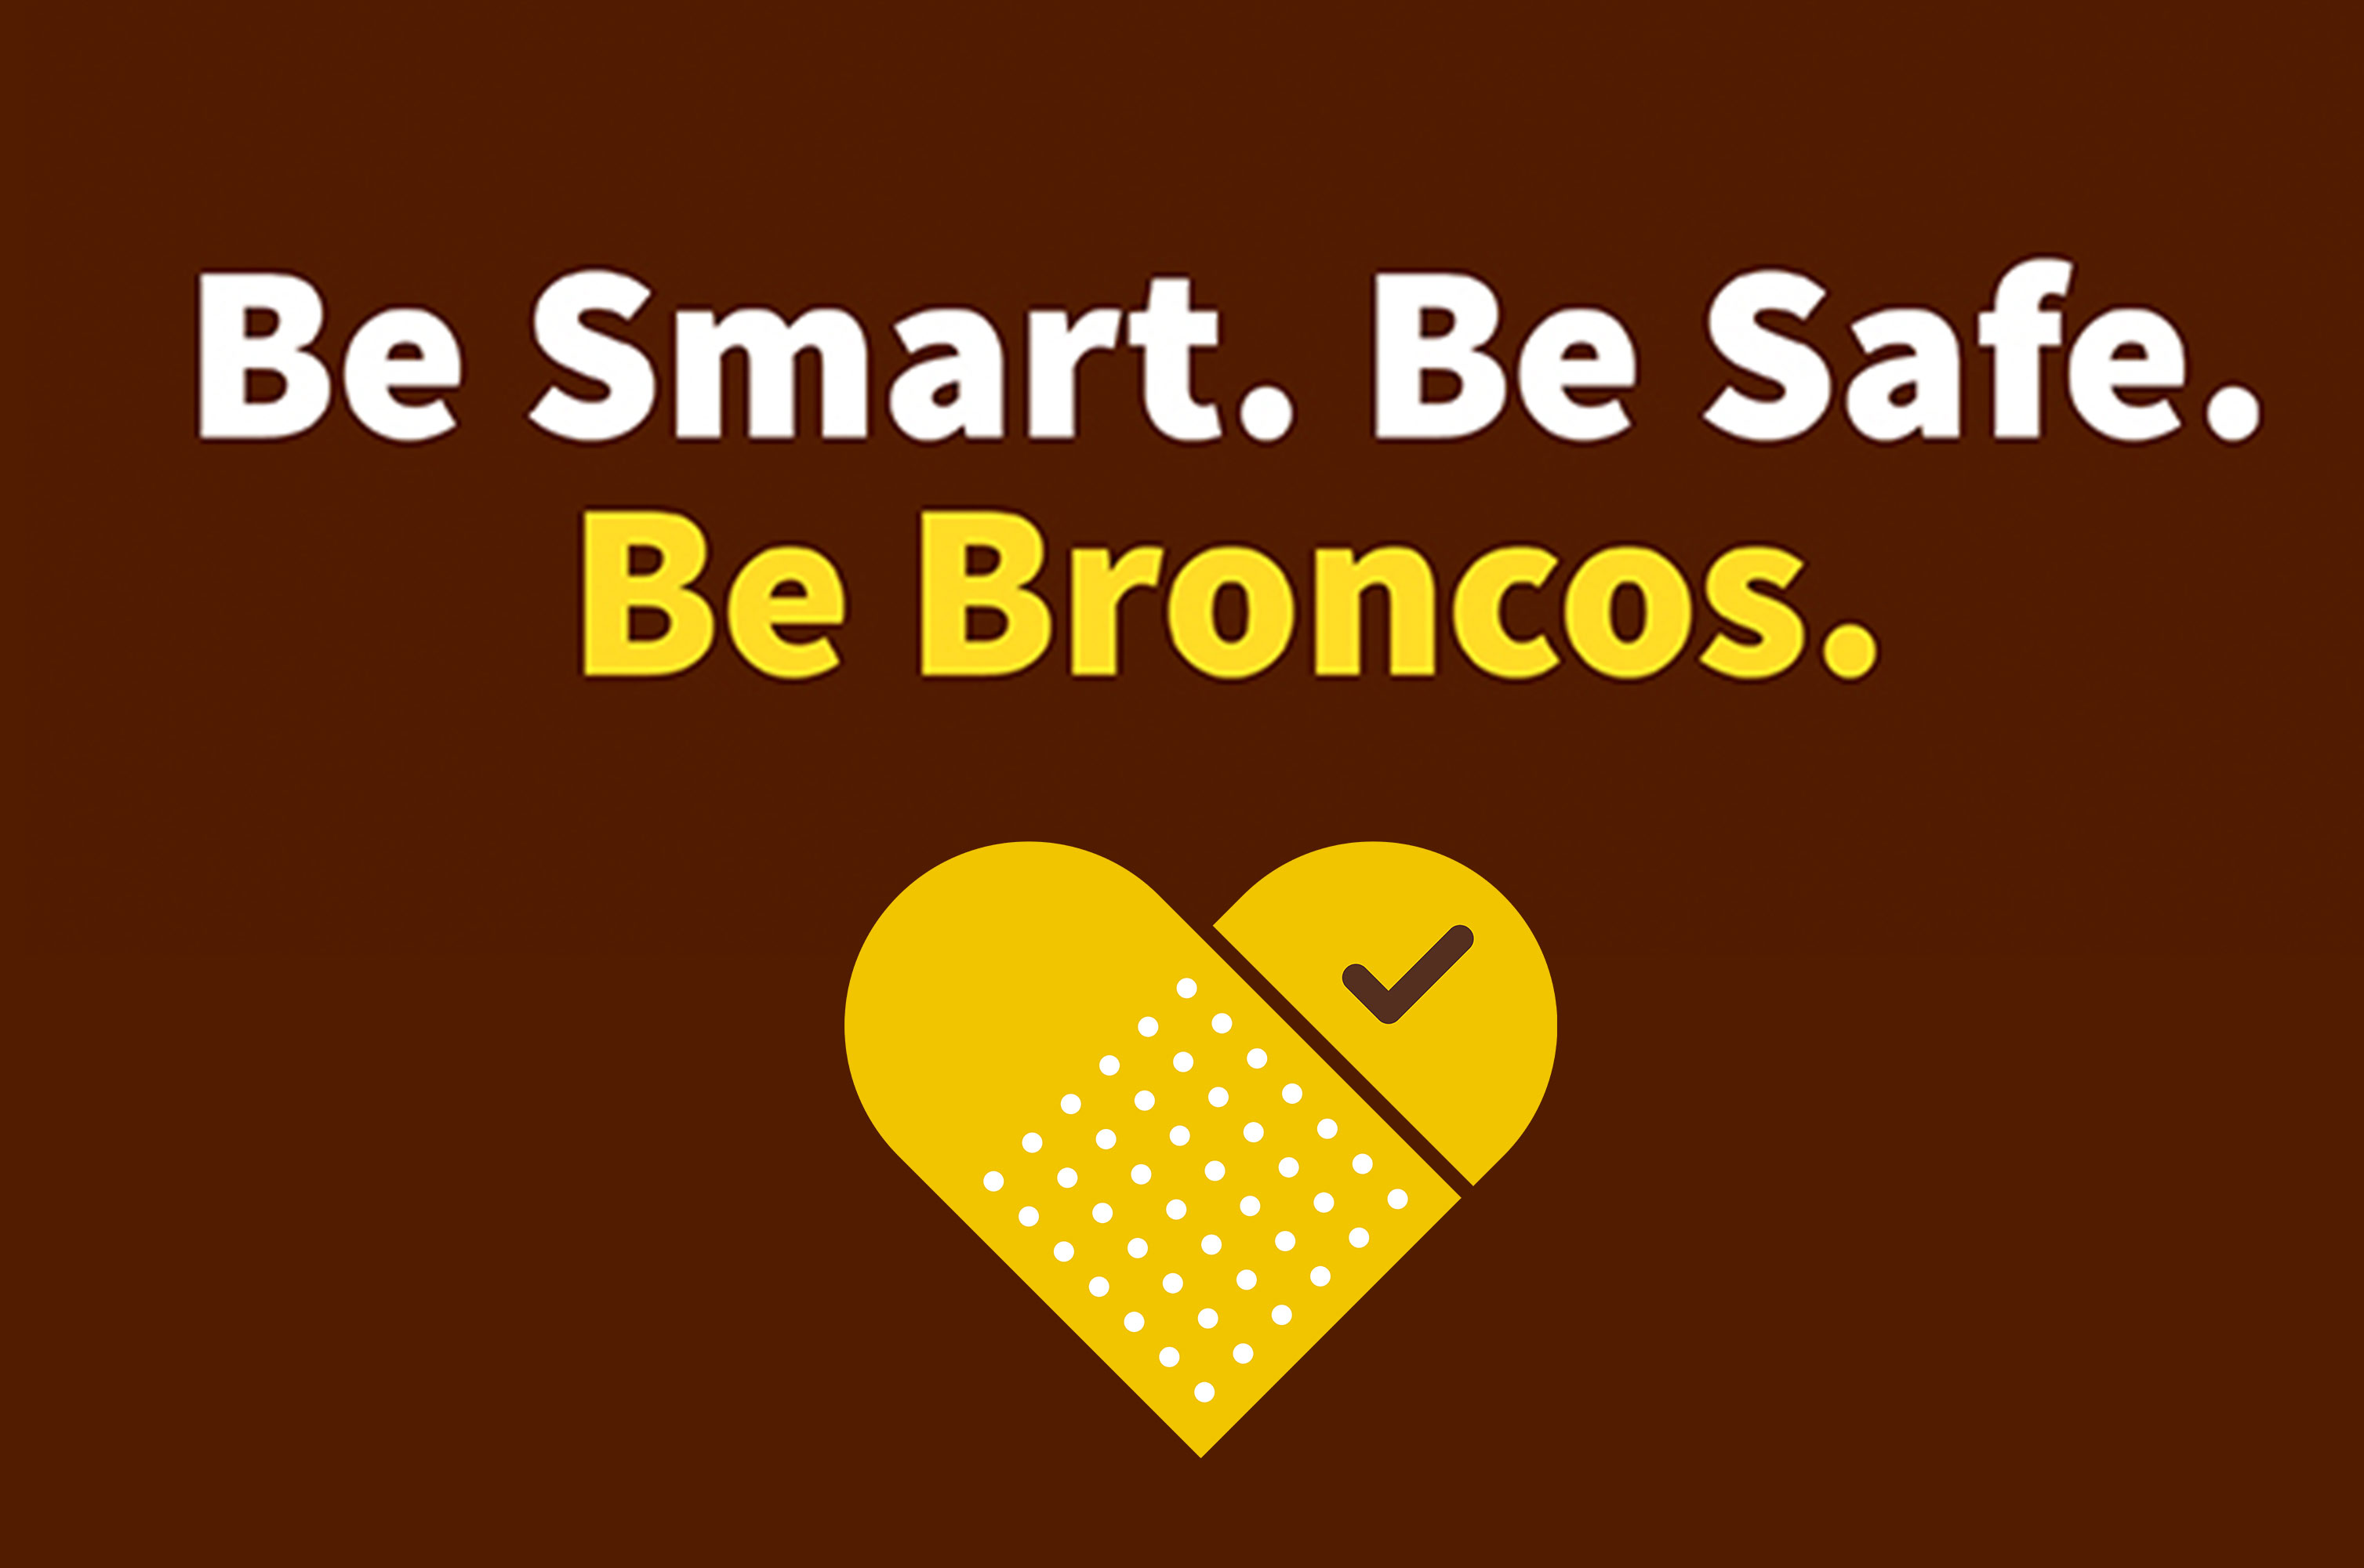 A graphic that says, "Be Smart. Be Safe. Be Broncos."